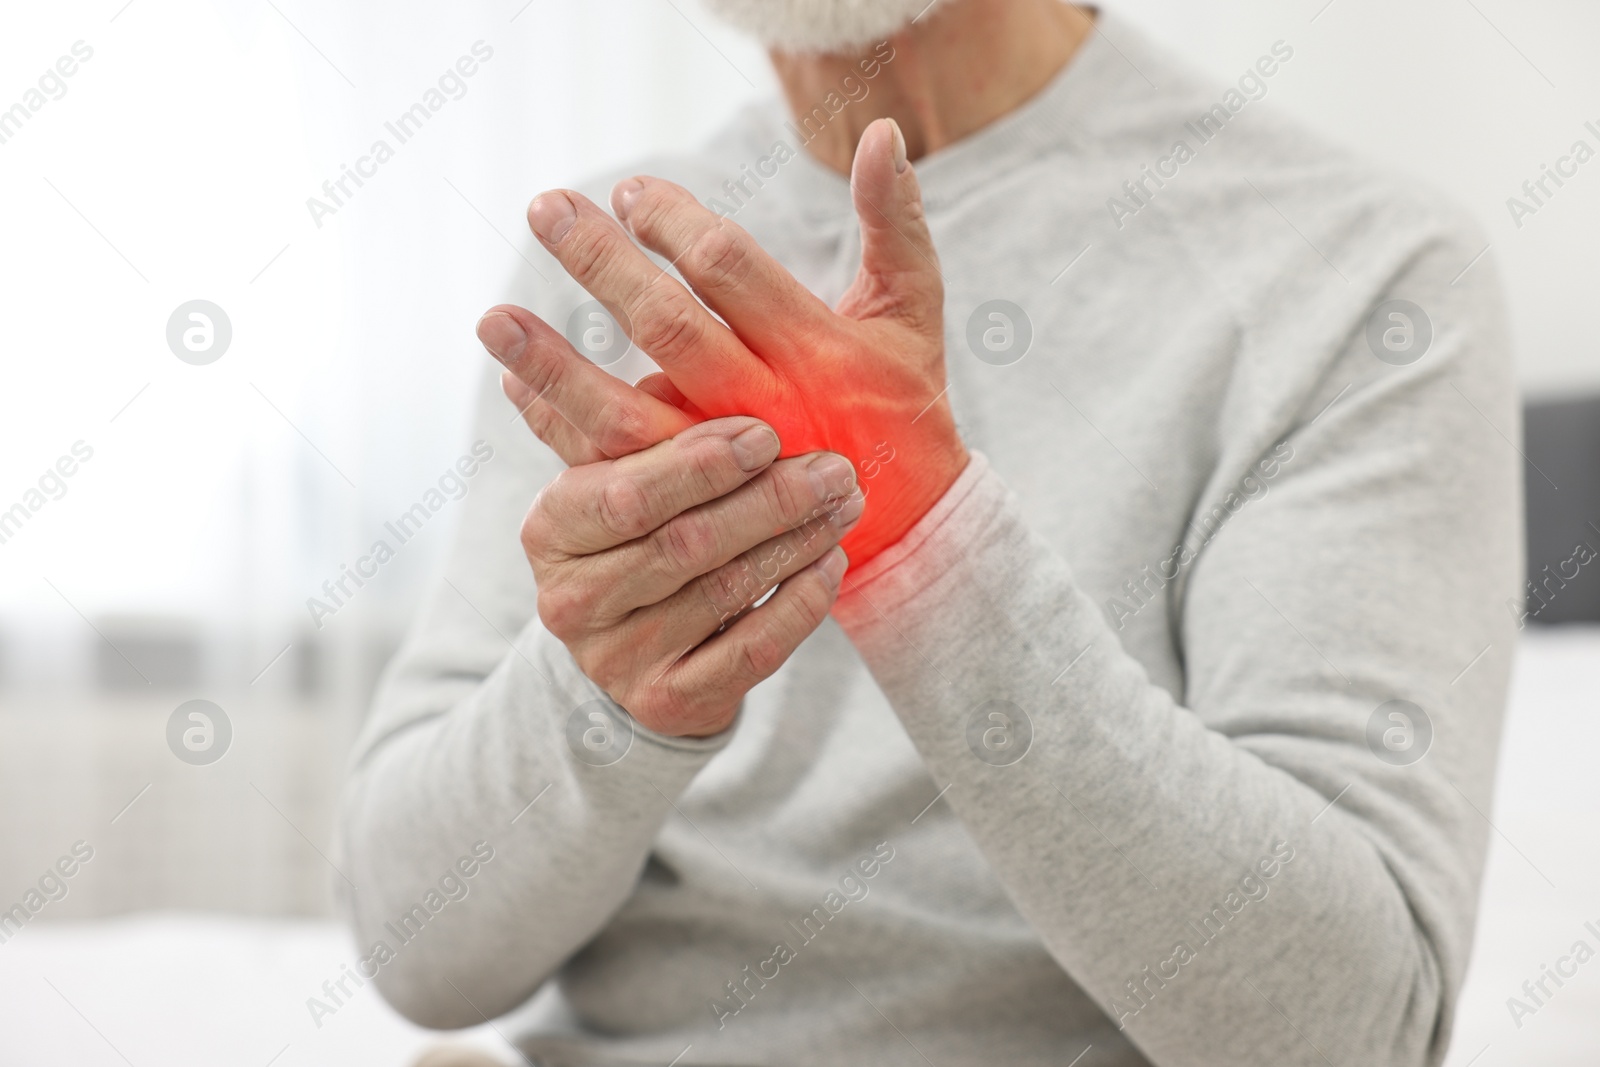 Image of Arthritis symptoms. Man suffering from pain in his hand indoors, closeup